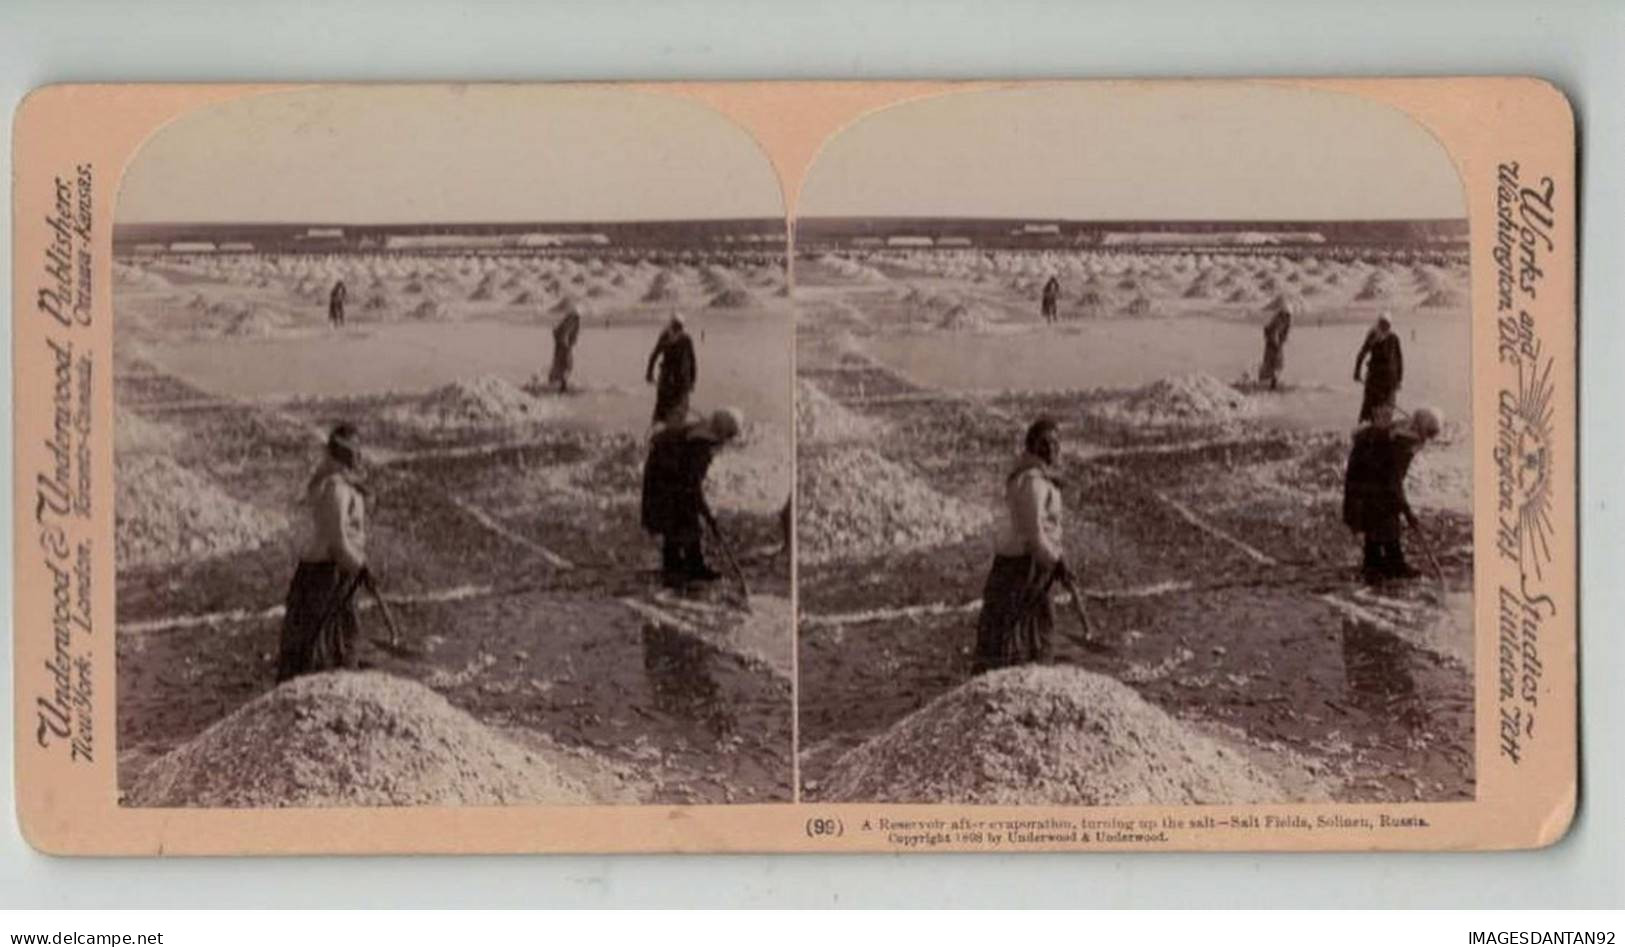 RUSSIE RUSSIA #PP1308 SOLINEN TERRAIN SALES SEL REMUE RESERVOIR 1898 - Stereo-Photographie